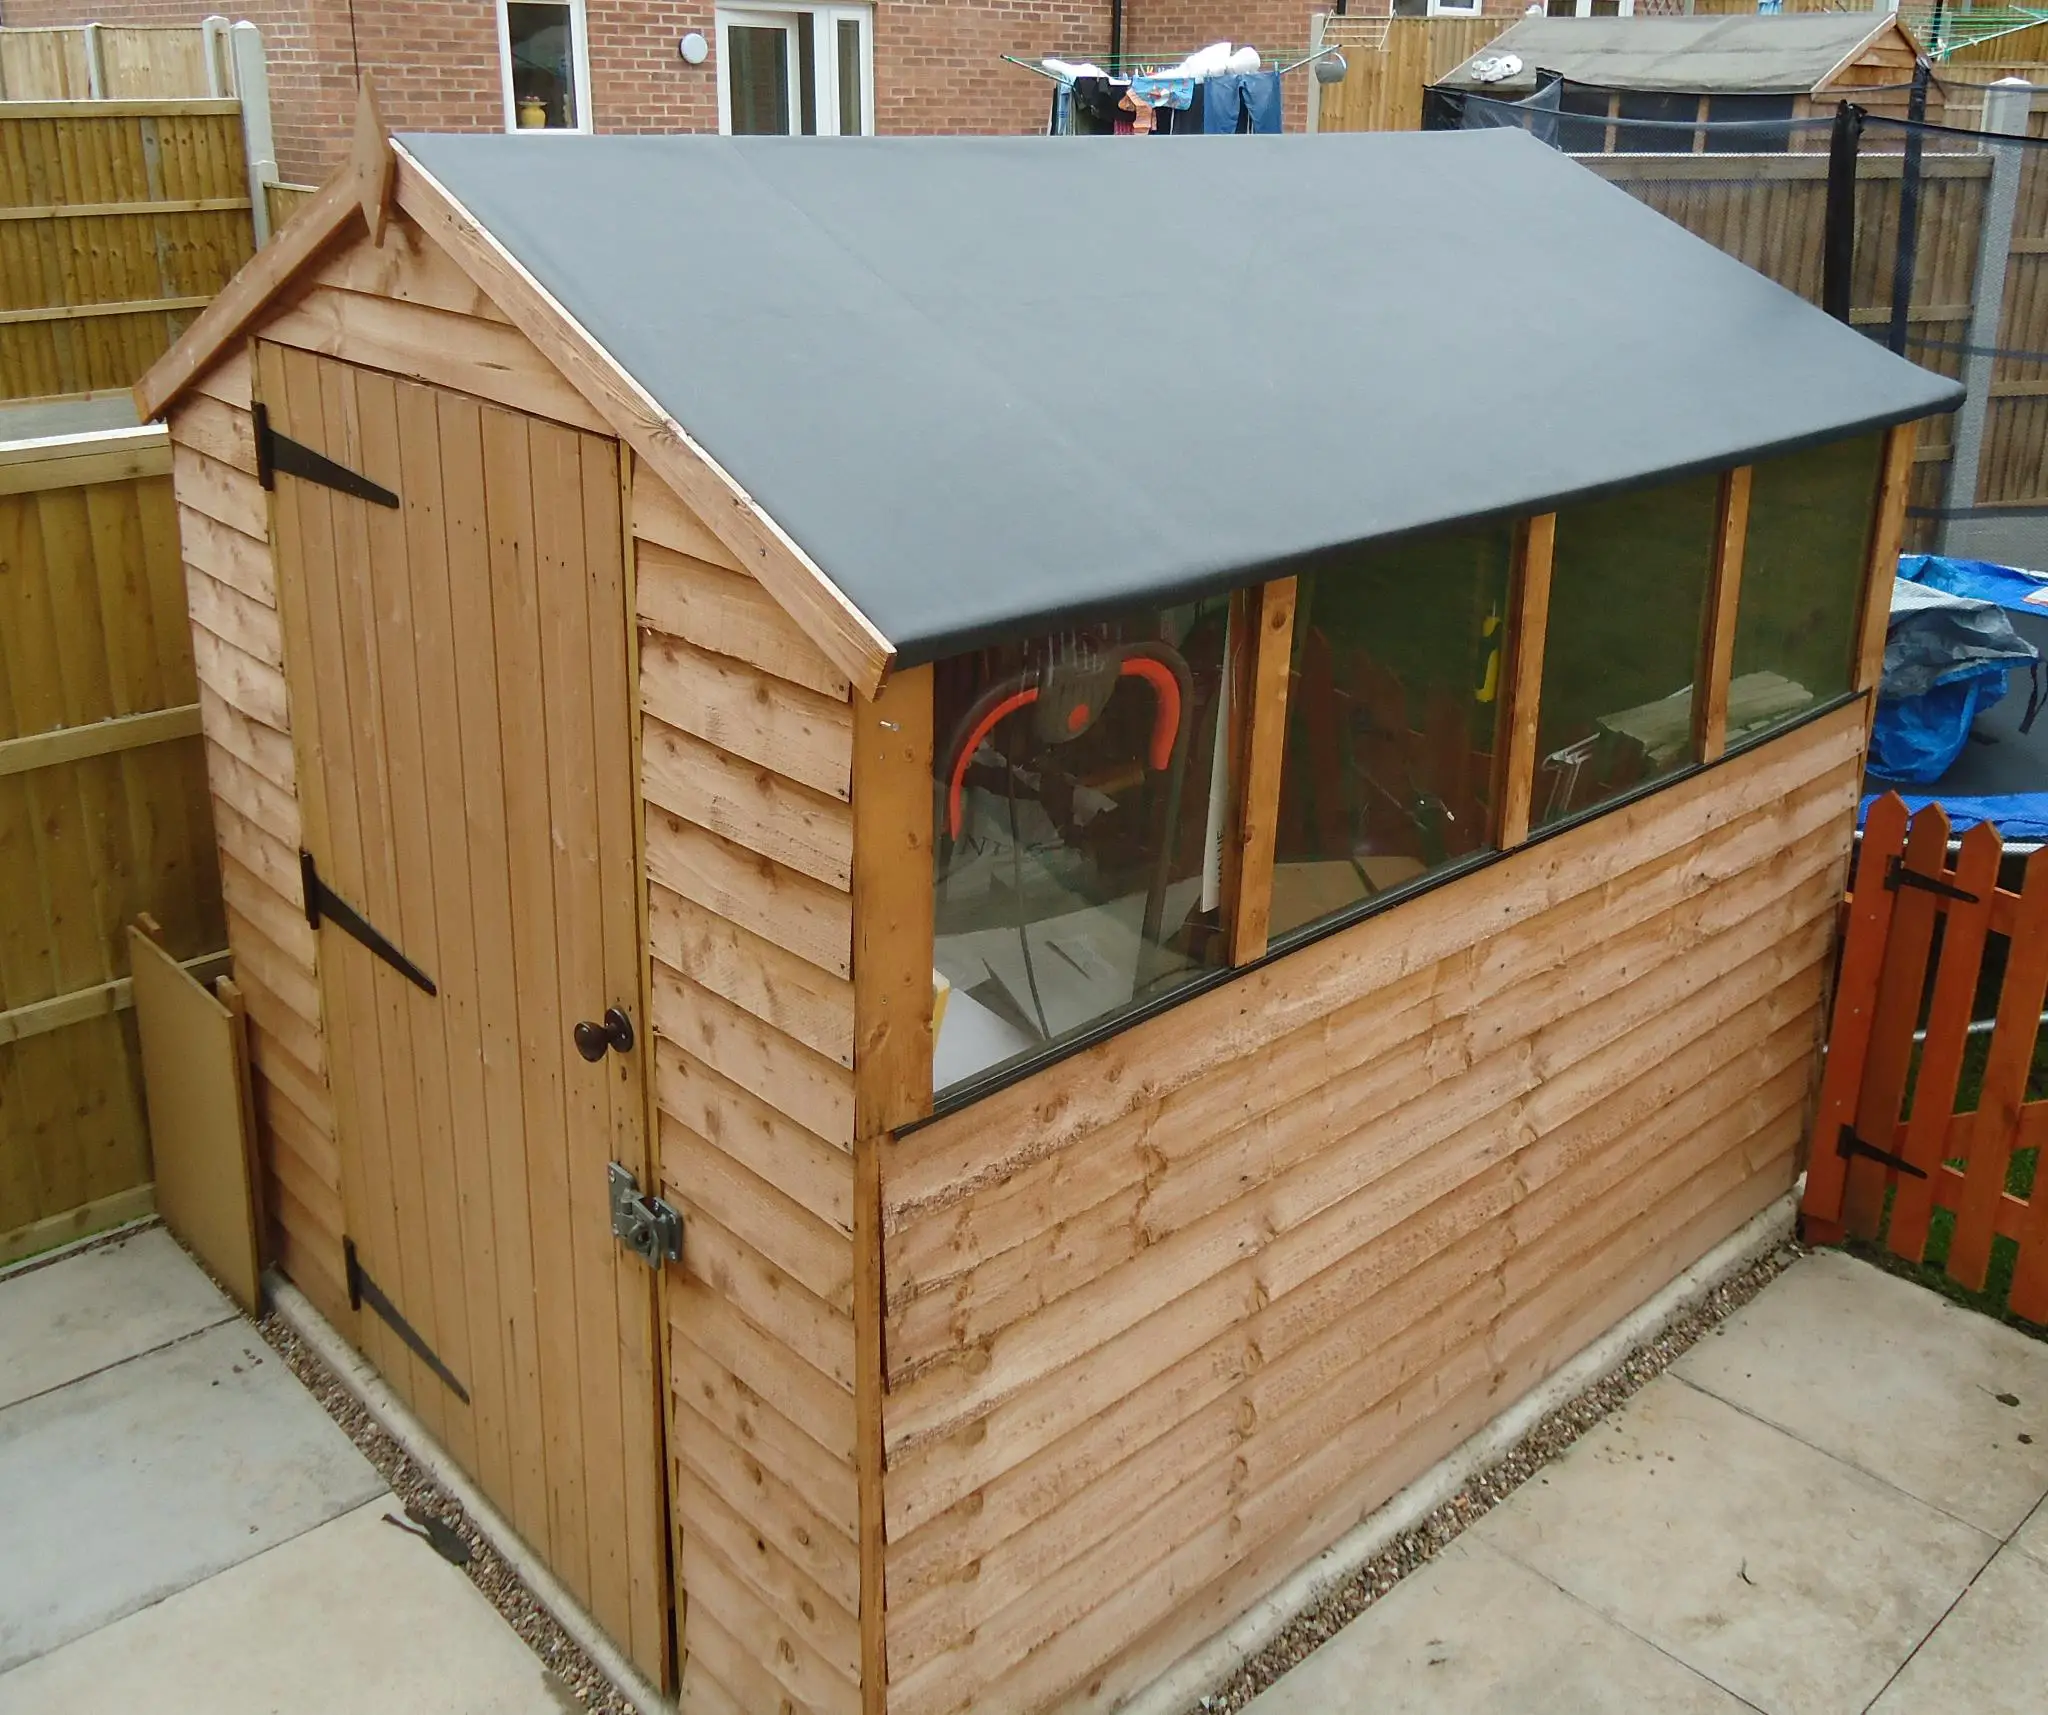 The Easiest Way to Replace Your Shed Roofing